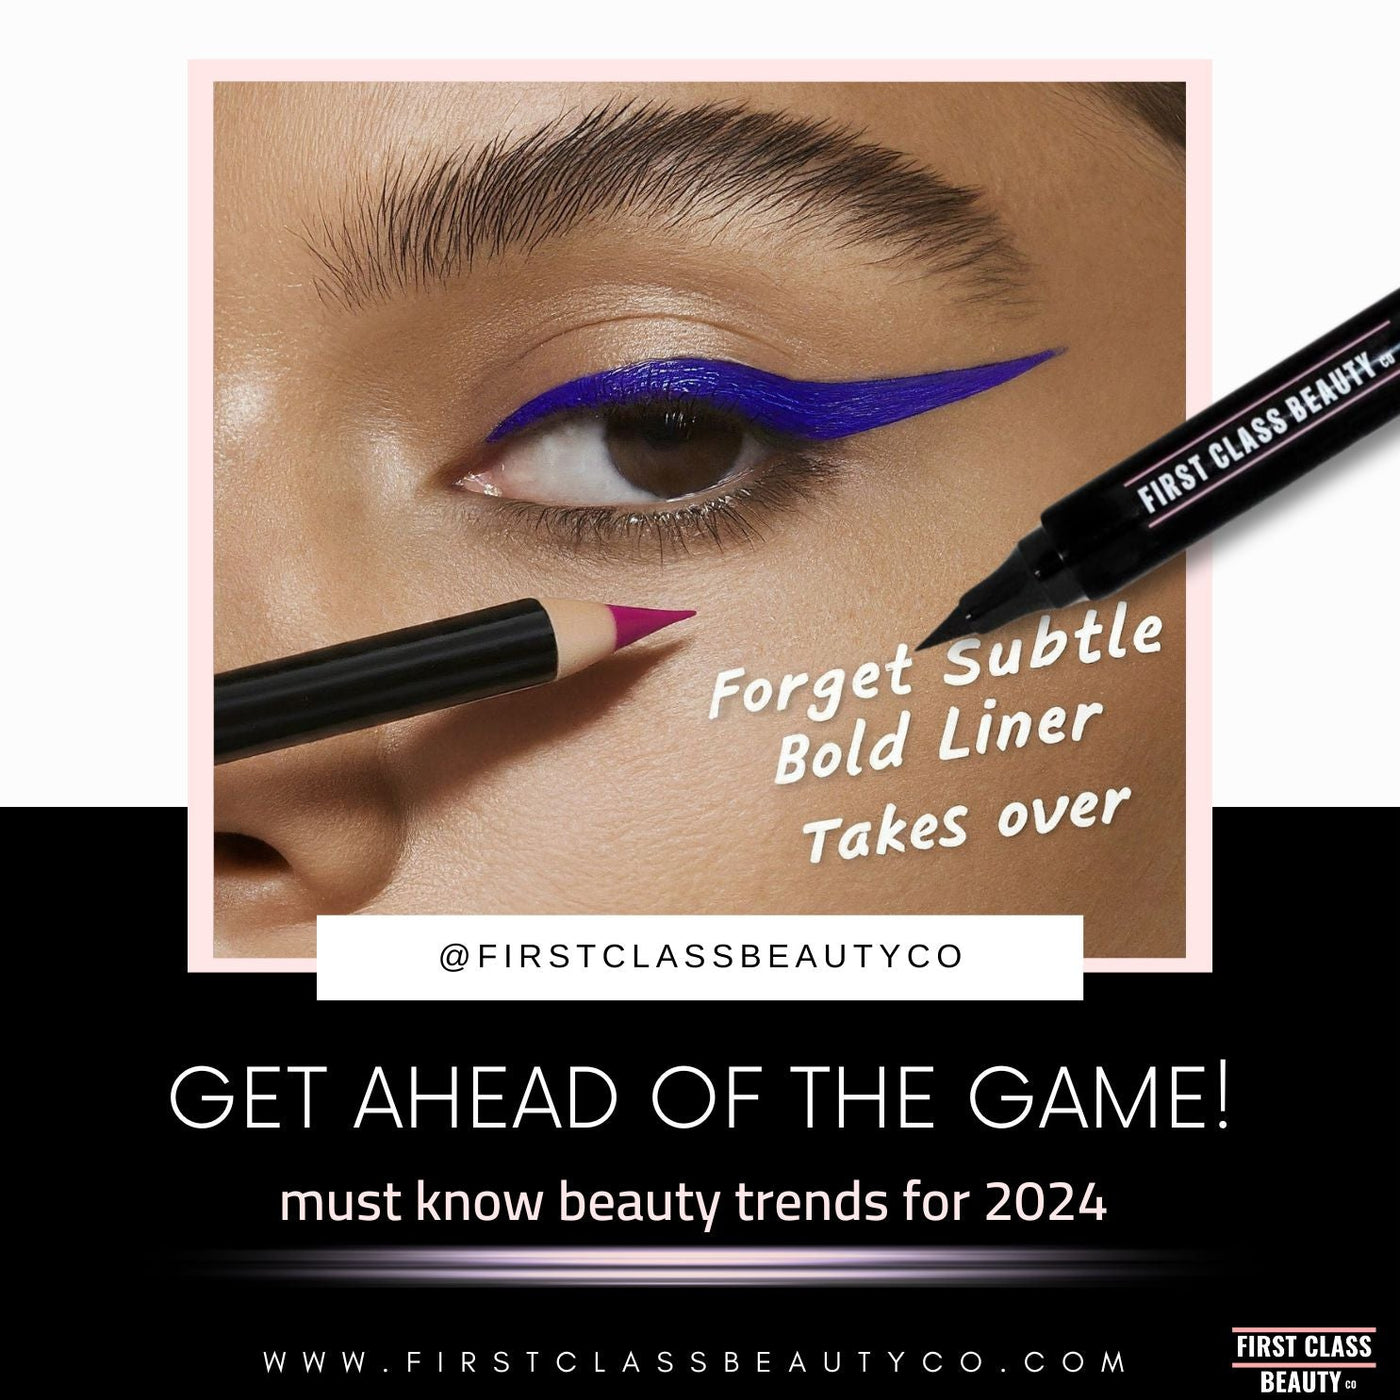 beauty blog from first class beauty co displaying a women with bold blue winged eyeliner and feathered brows saying forget subtle bold liner takes over